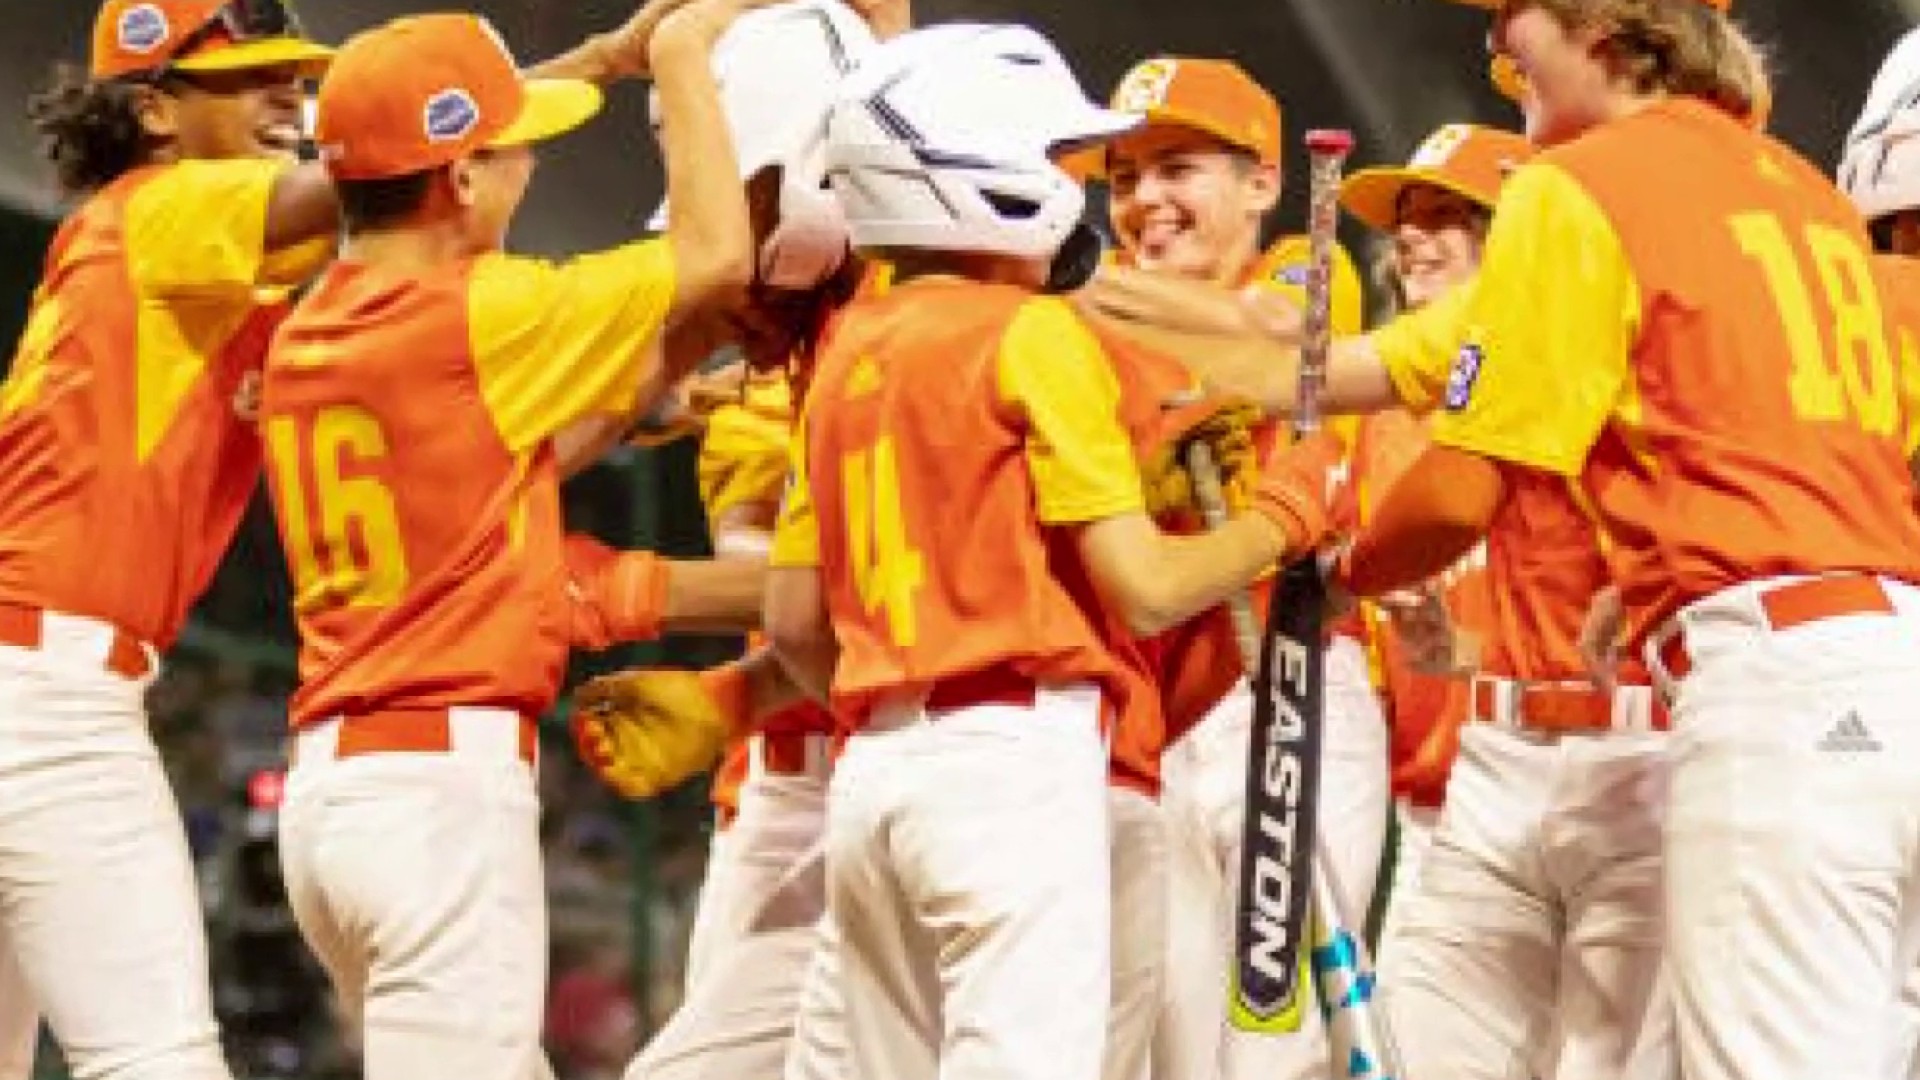 Pearland continues Little League World Series journey Monday night